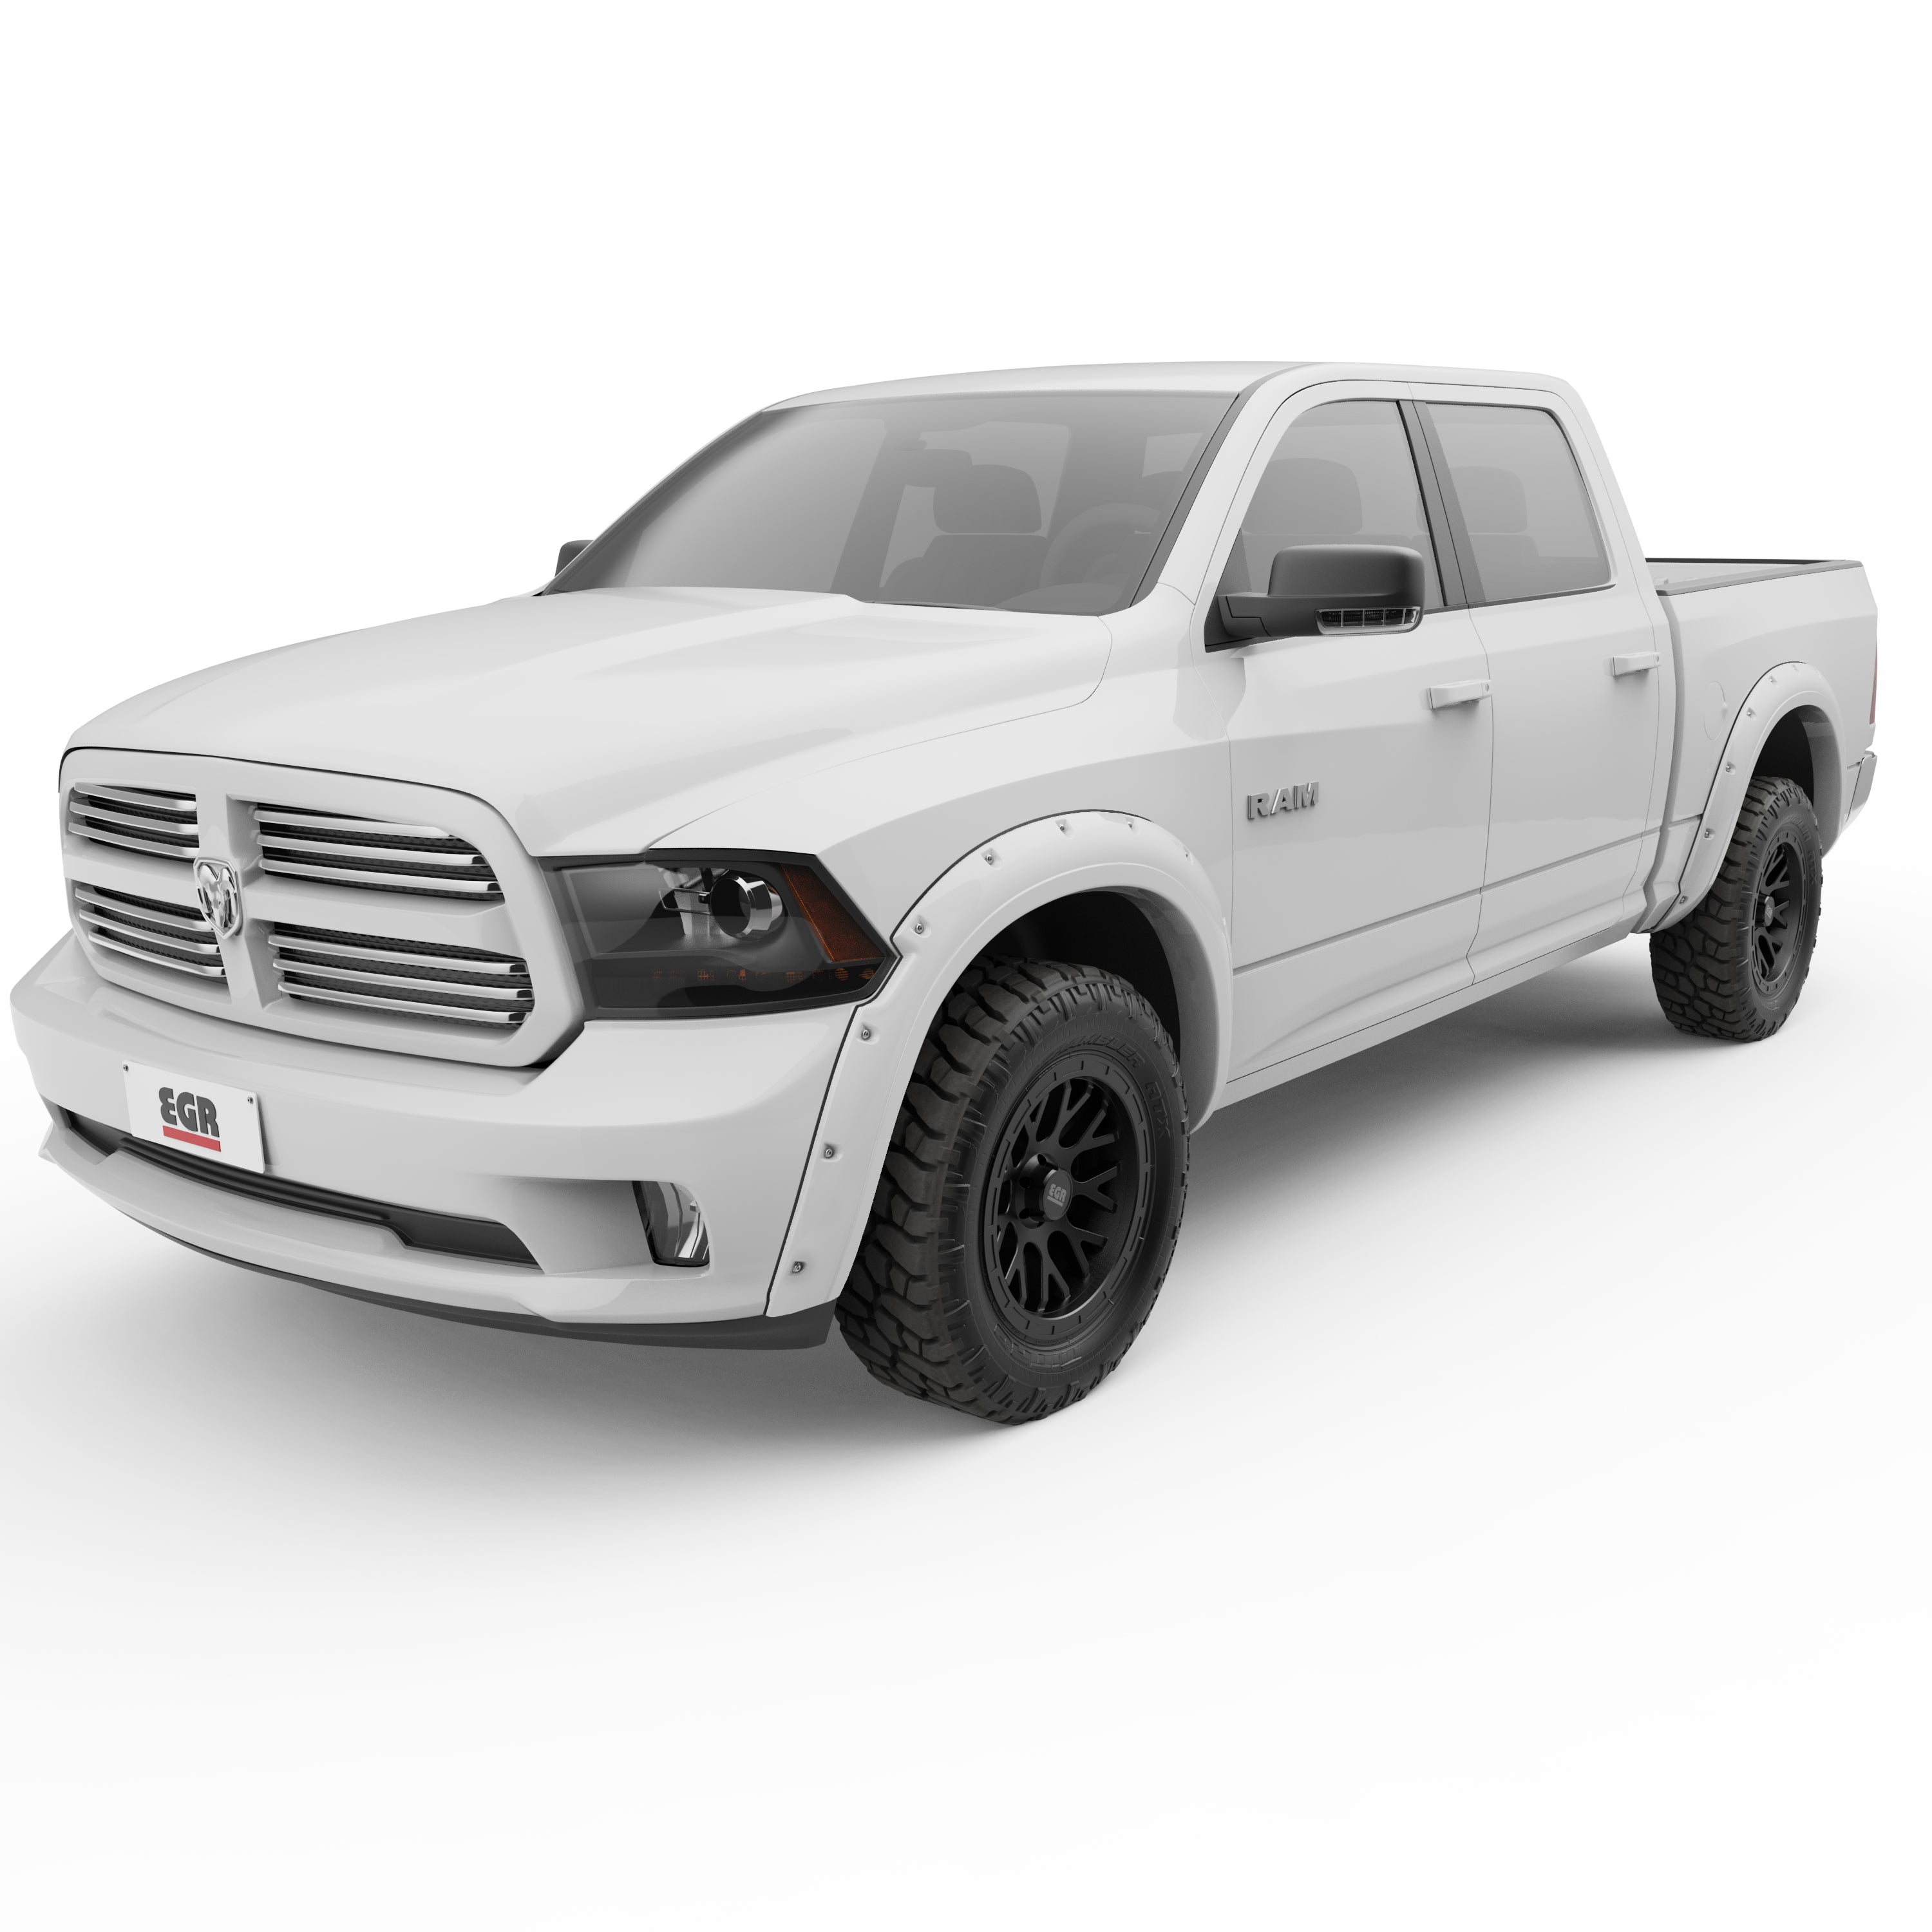 EGR 2011-2018 Dodge Ram 1500 Sport 2011-2023 Ram 1500 Classic 4 Door Extended Cab Crew Cab Pickup Traditional Bolt-on look Fender Flares set of 4 Painted to Code Bright White 792754-PW7